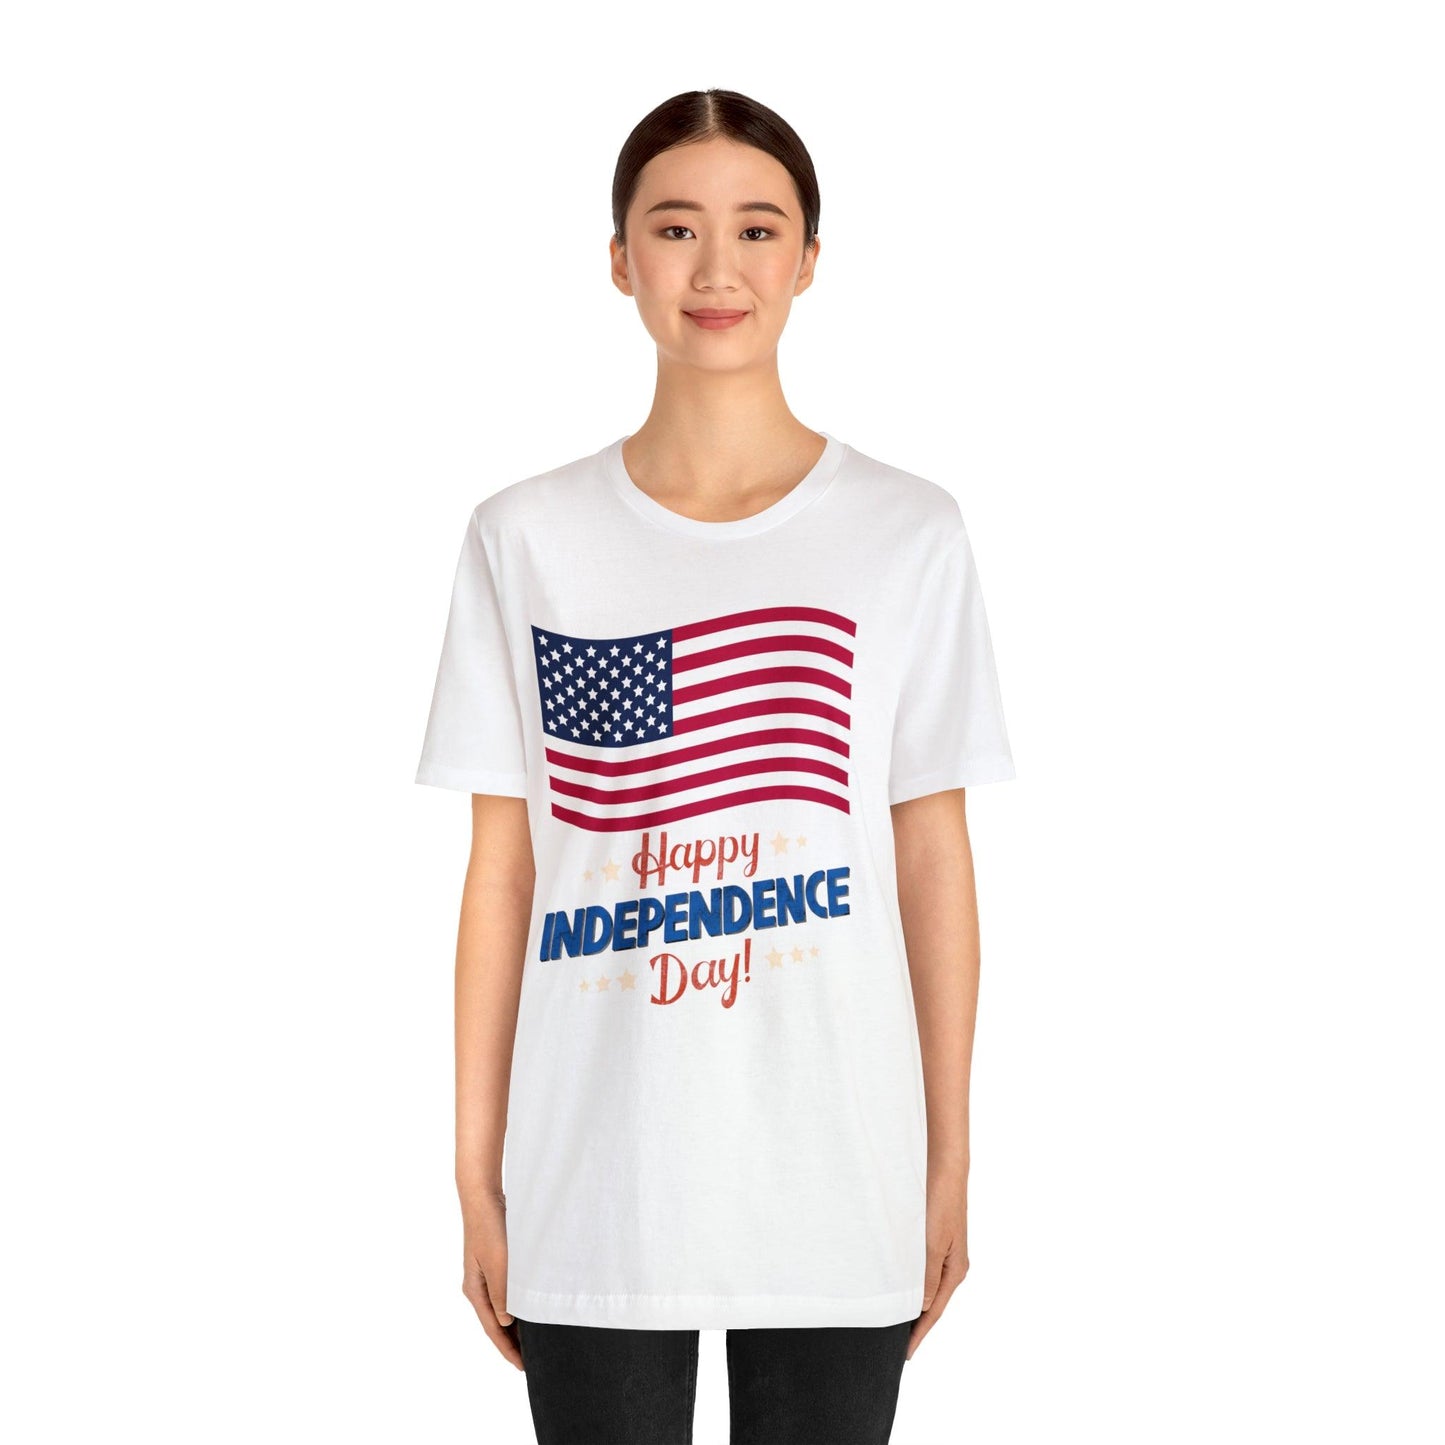 Independence Day shirt, American flag shirt, Red, white, and blue shirt, 4th of July clothing - Giftsmojo